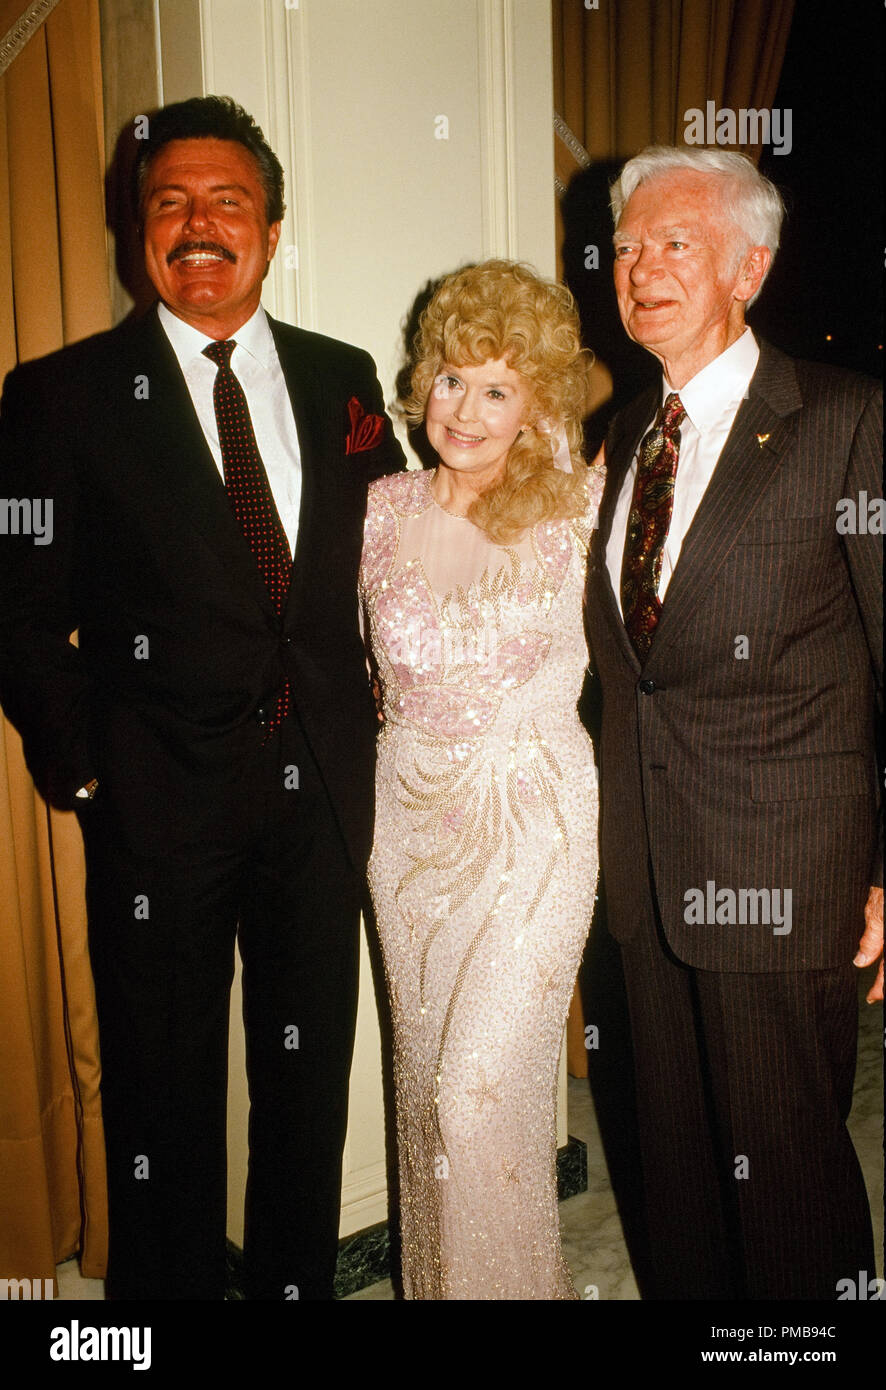 Max Baer Jr., Donna Douglas and Buddy Ebsen, March 20, 1992 File Reference # 32557 469THA Stock Photo